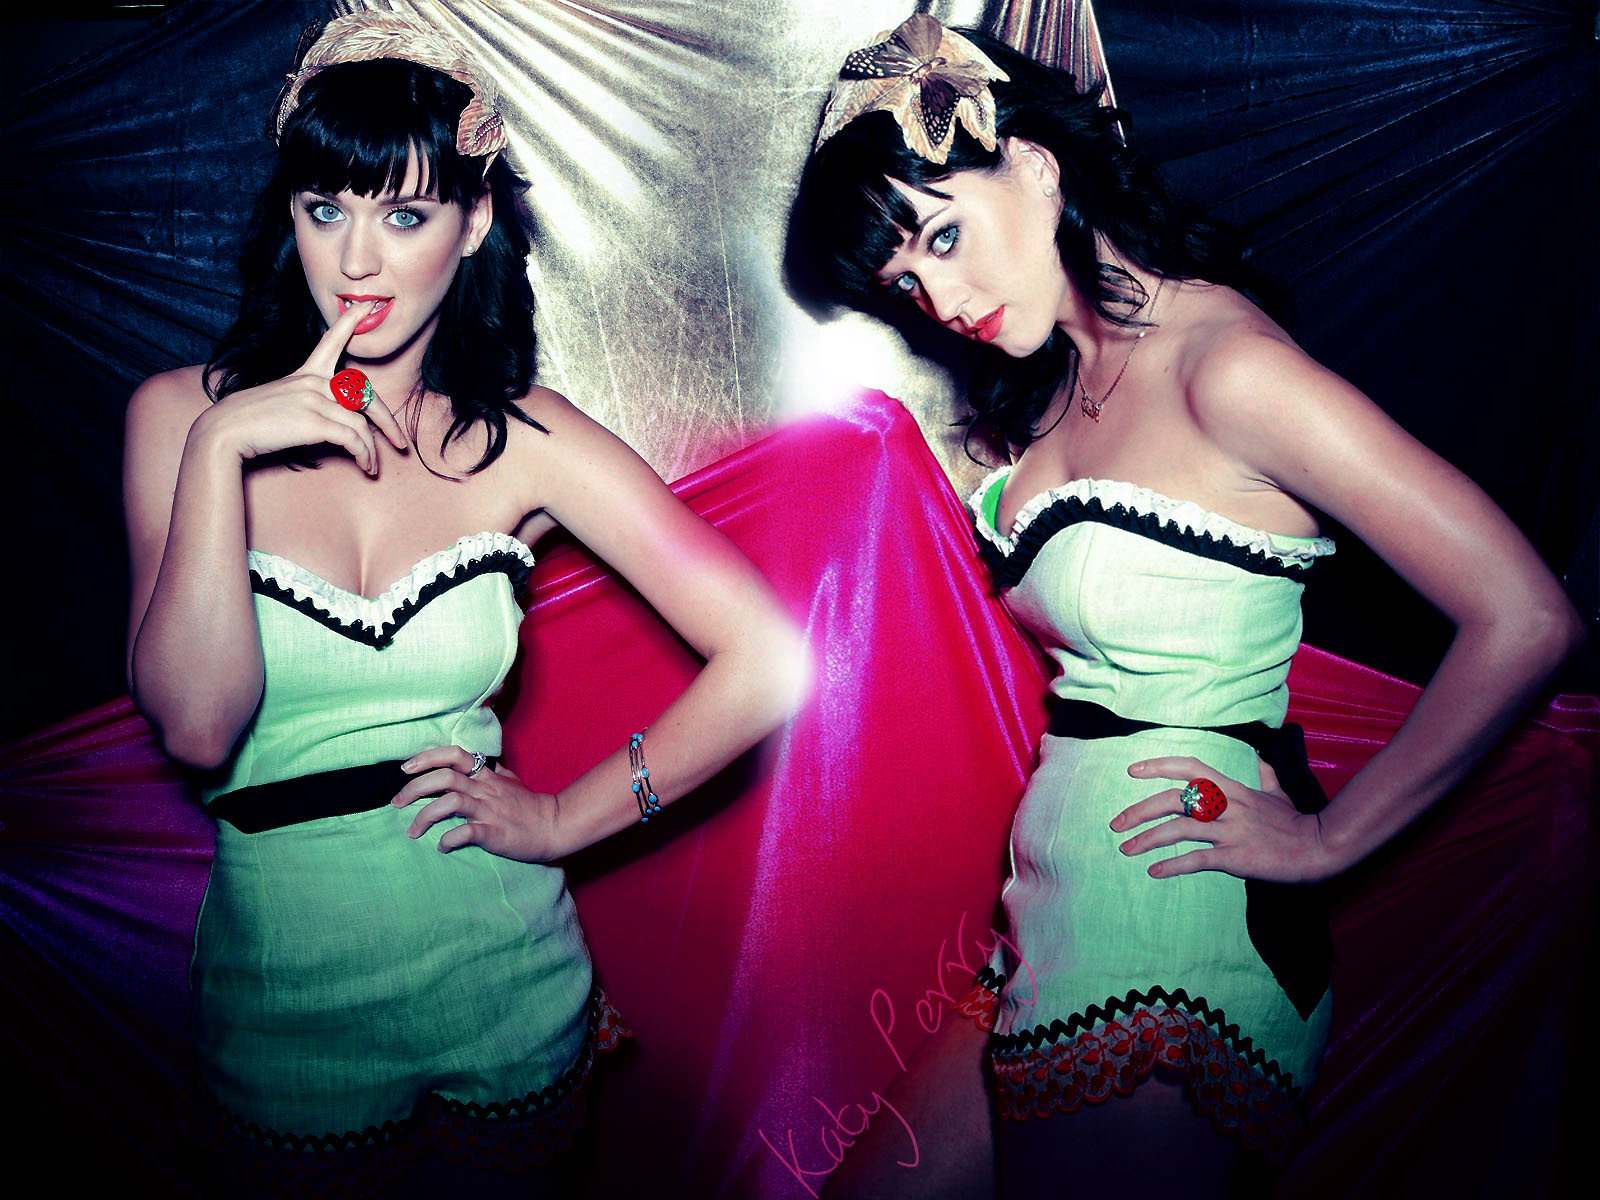 http://www.brightestyoungthings.com/wordpress/wp-content/uploads/2011/01/The-best-top-hd-desktop-katy-perry-wallpaper-katy-perry-wallpapers-33.jpg